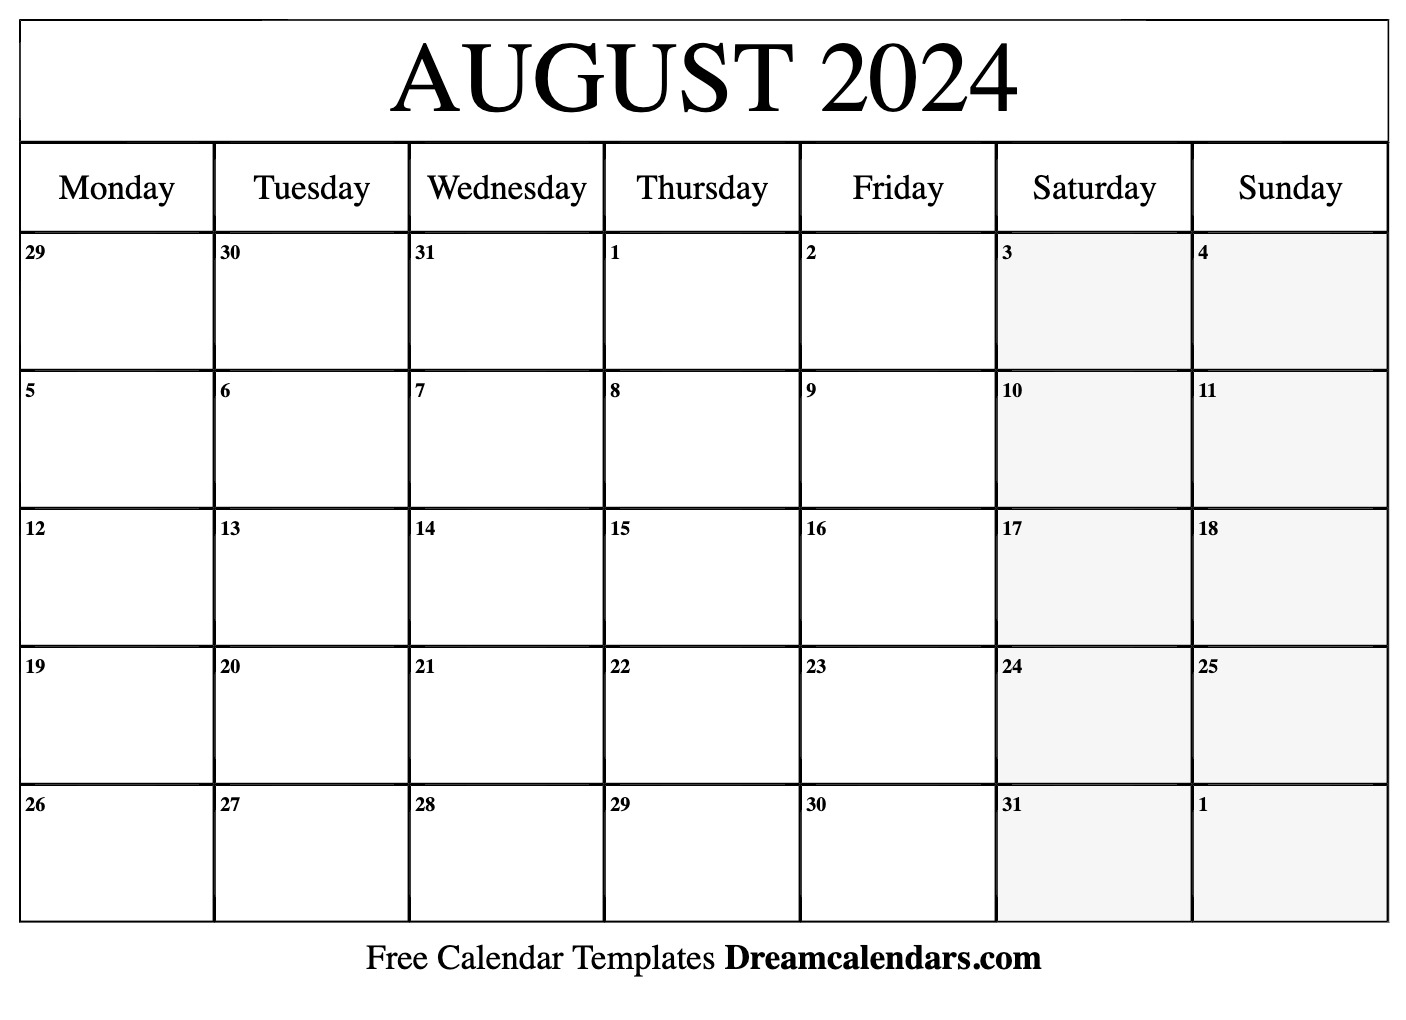 August 2024 Calendar | Free Blank Printable With Holidays for August 2024 Printable Calendar